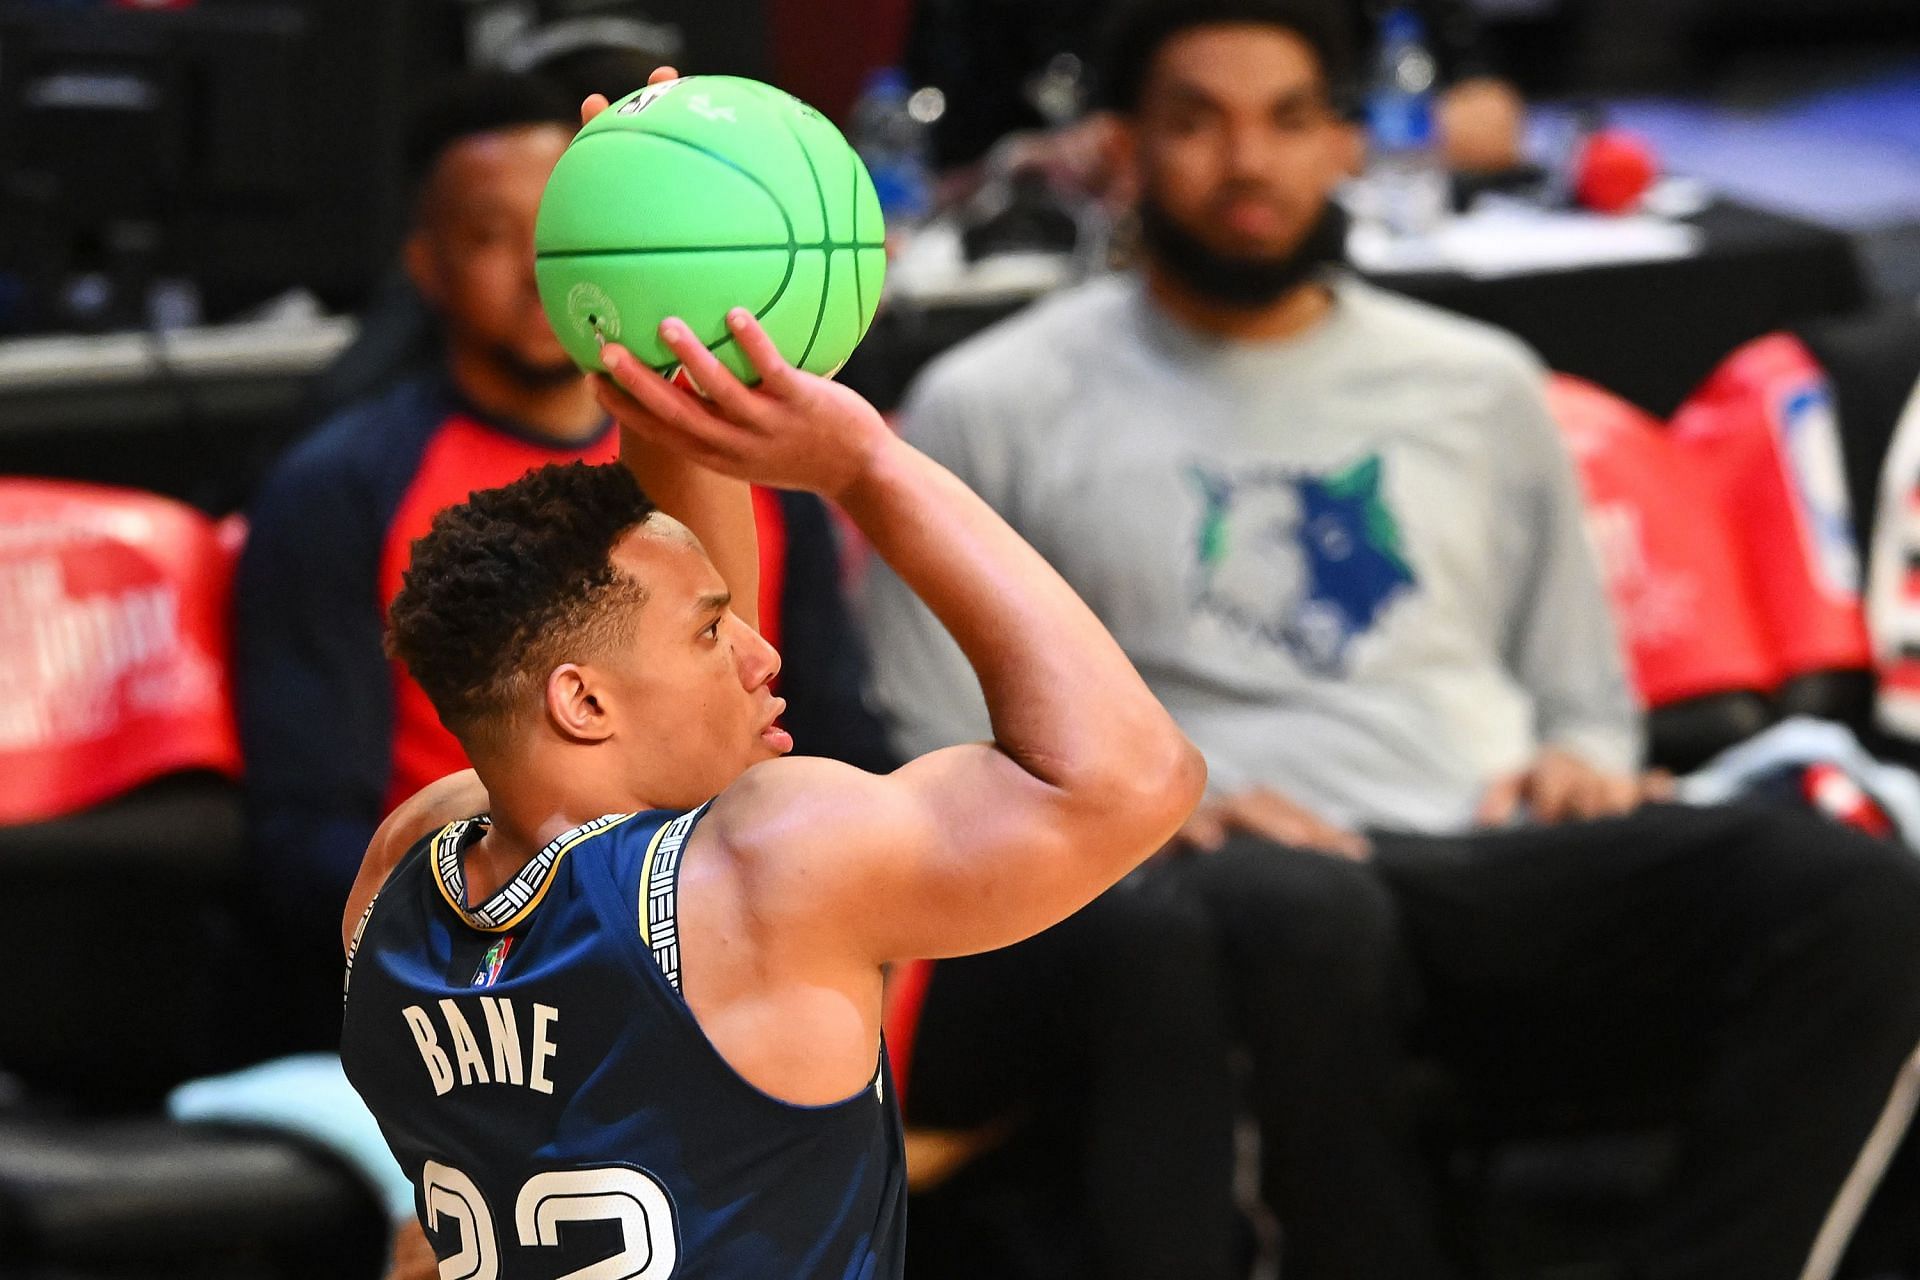 Desmond Bane at the 2022 NBA All-Star - MTN DEW 3-Point Contest.